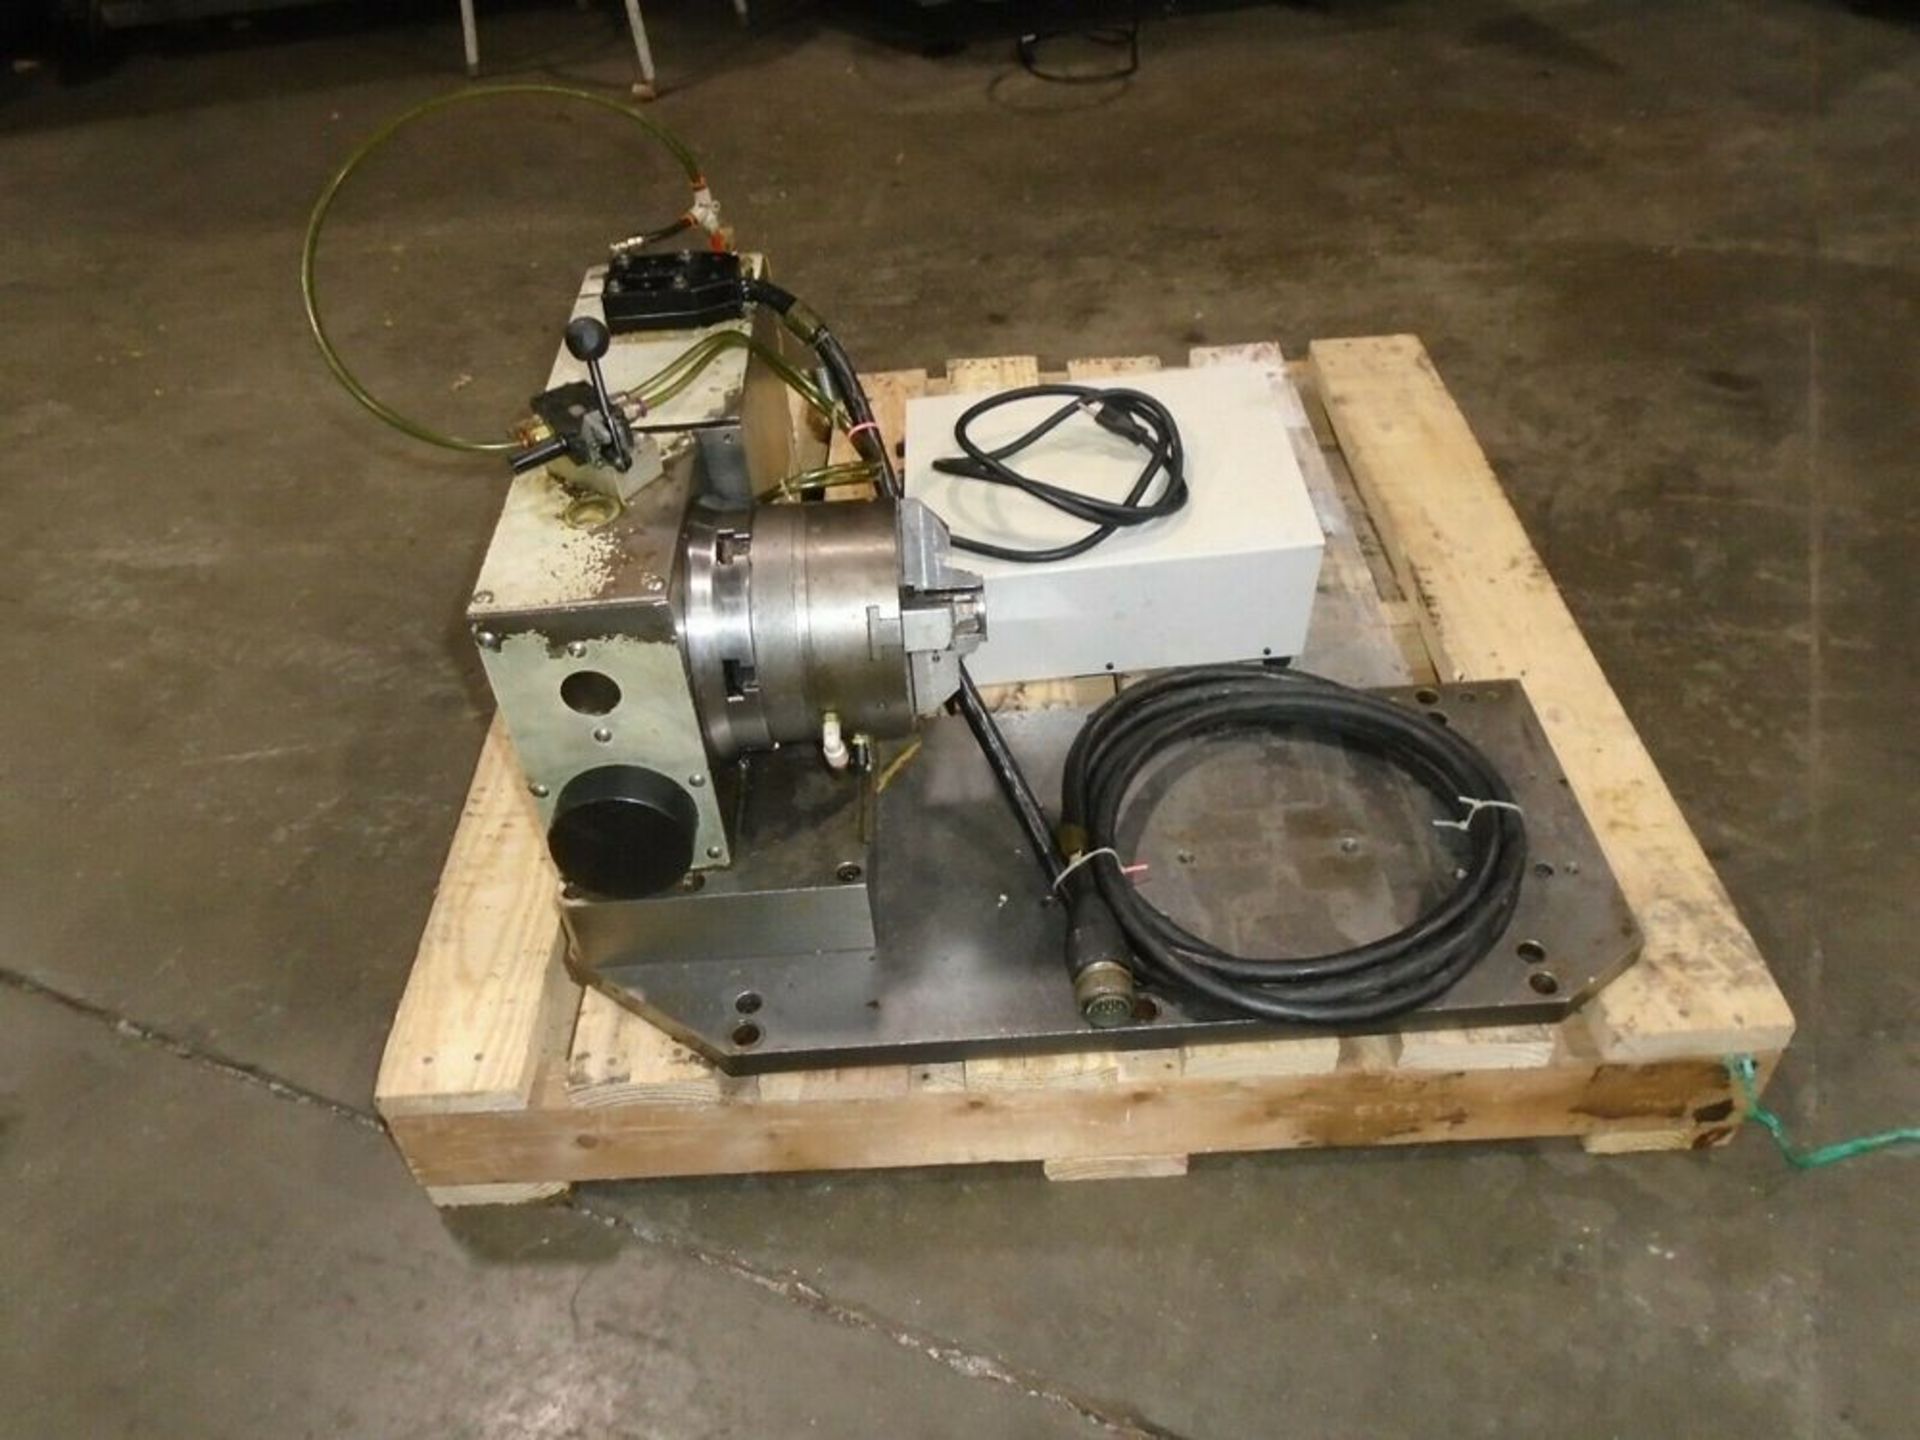 Haas CNC HRT-160 Rotary Table With Haas Servo Control And 6” Air Chuck - Image 4 of 5